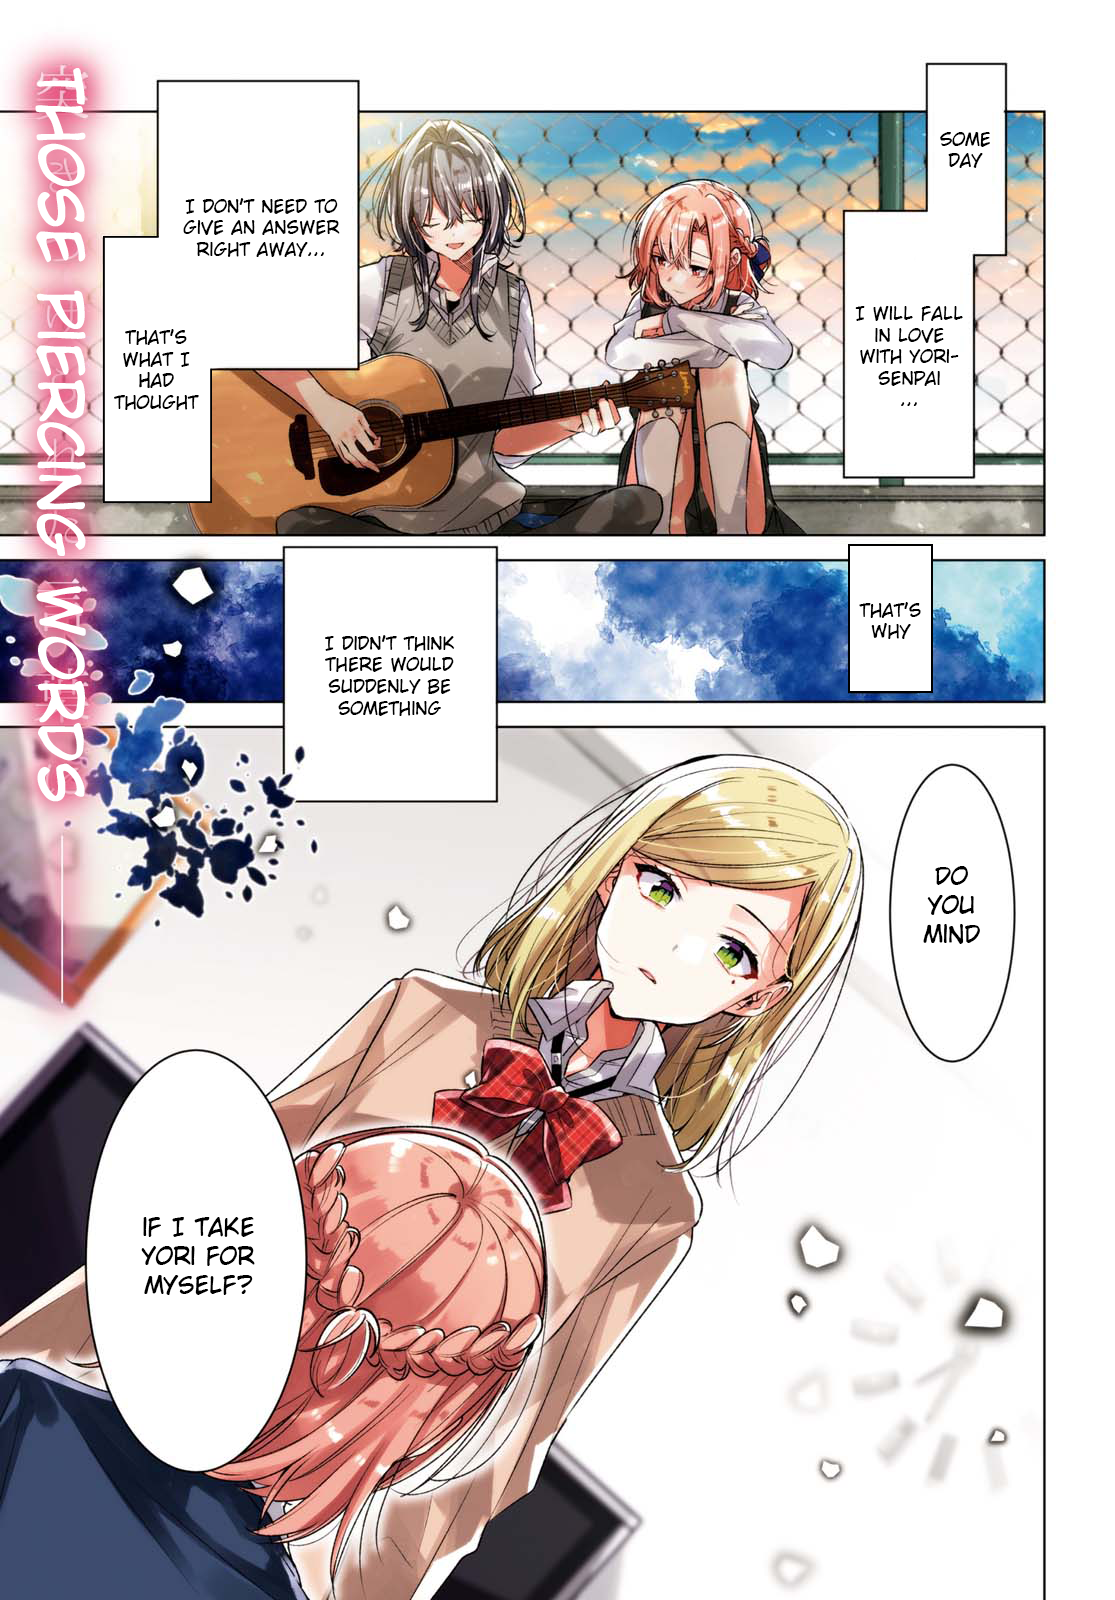 Whispering You A Love Song - Page 1